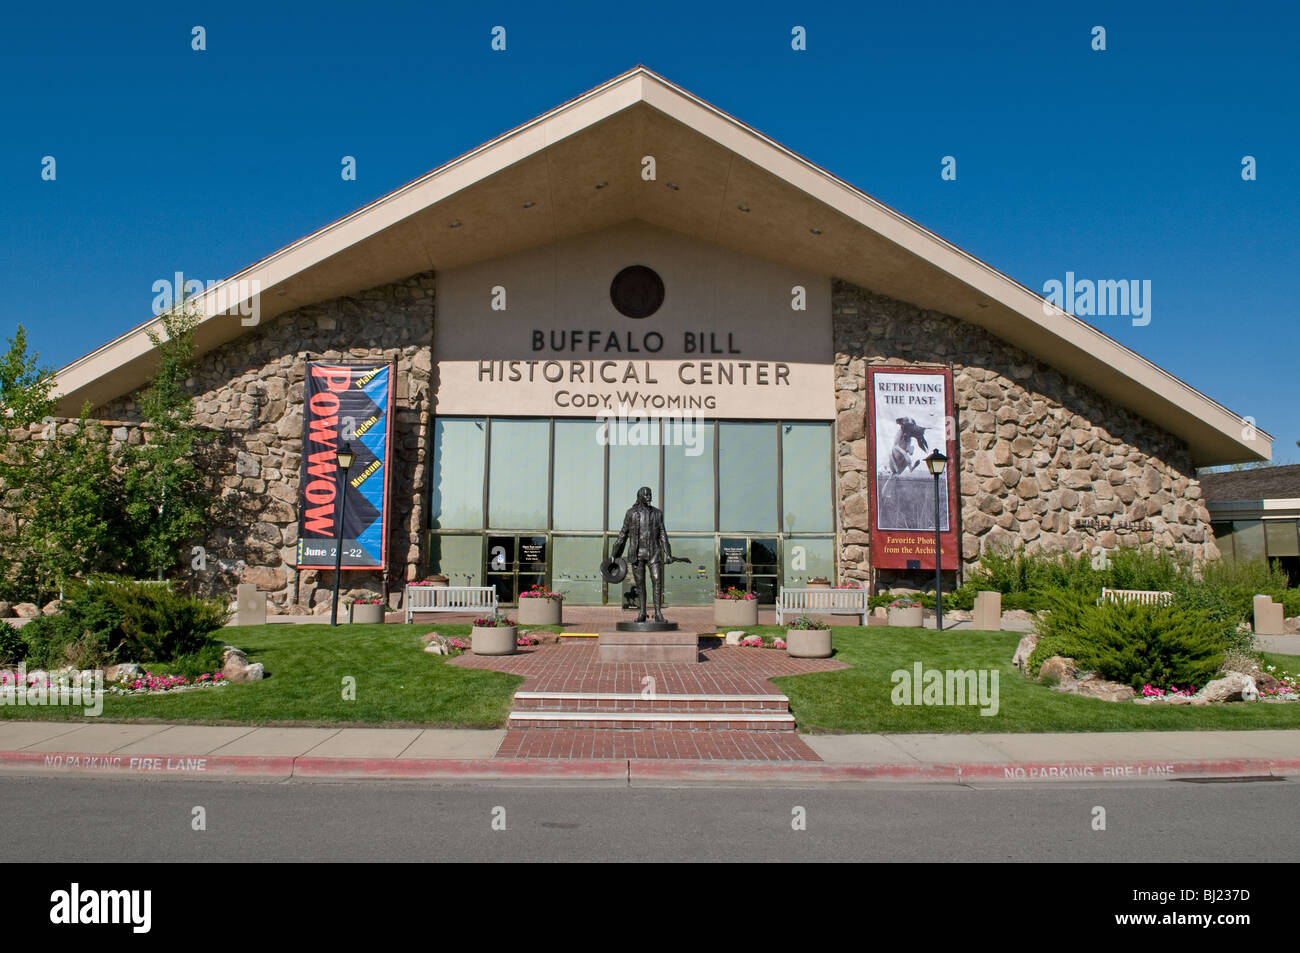 Entrance to the Buffalo Bill Historical Center in Cody, Wyoming. Stock Photo